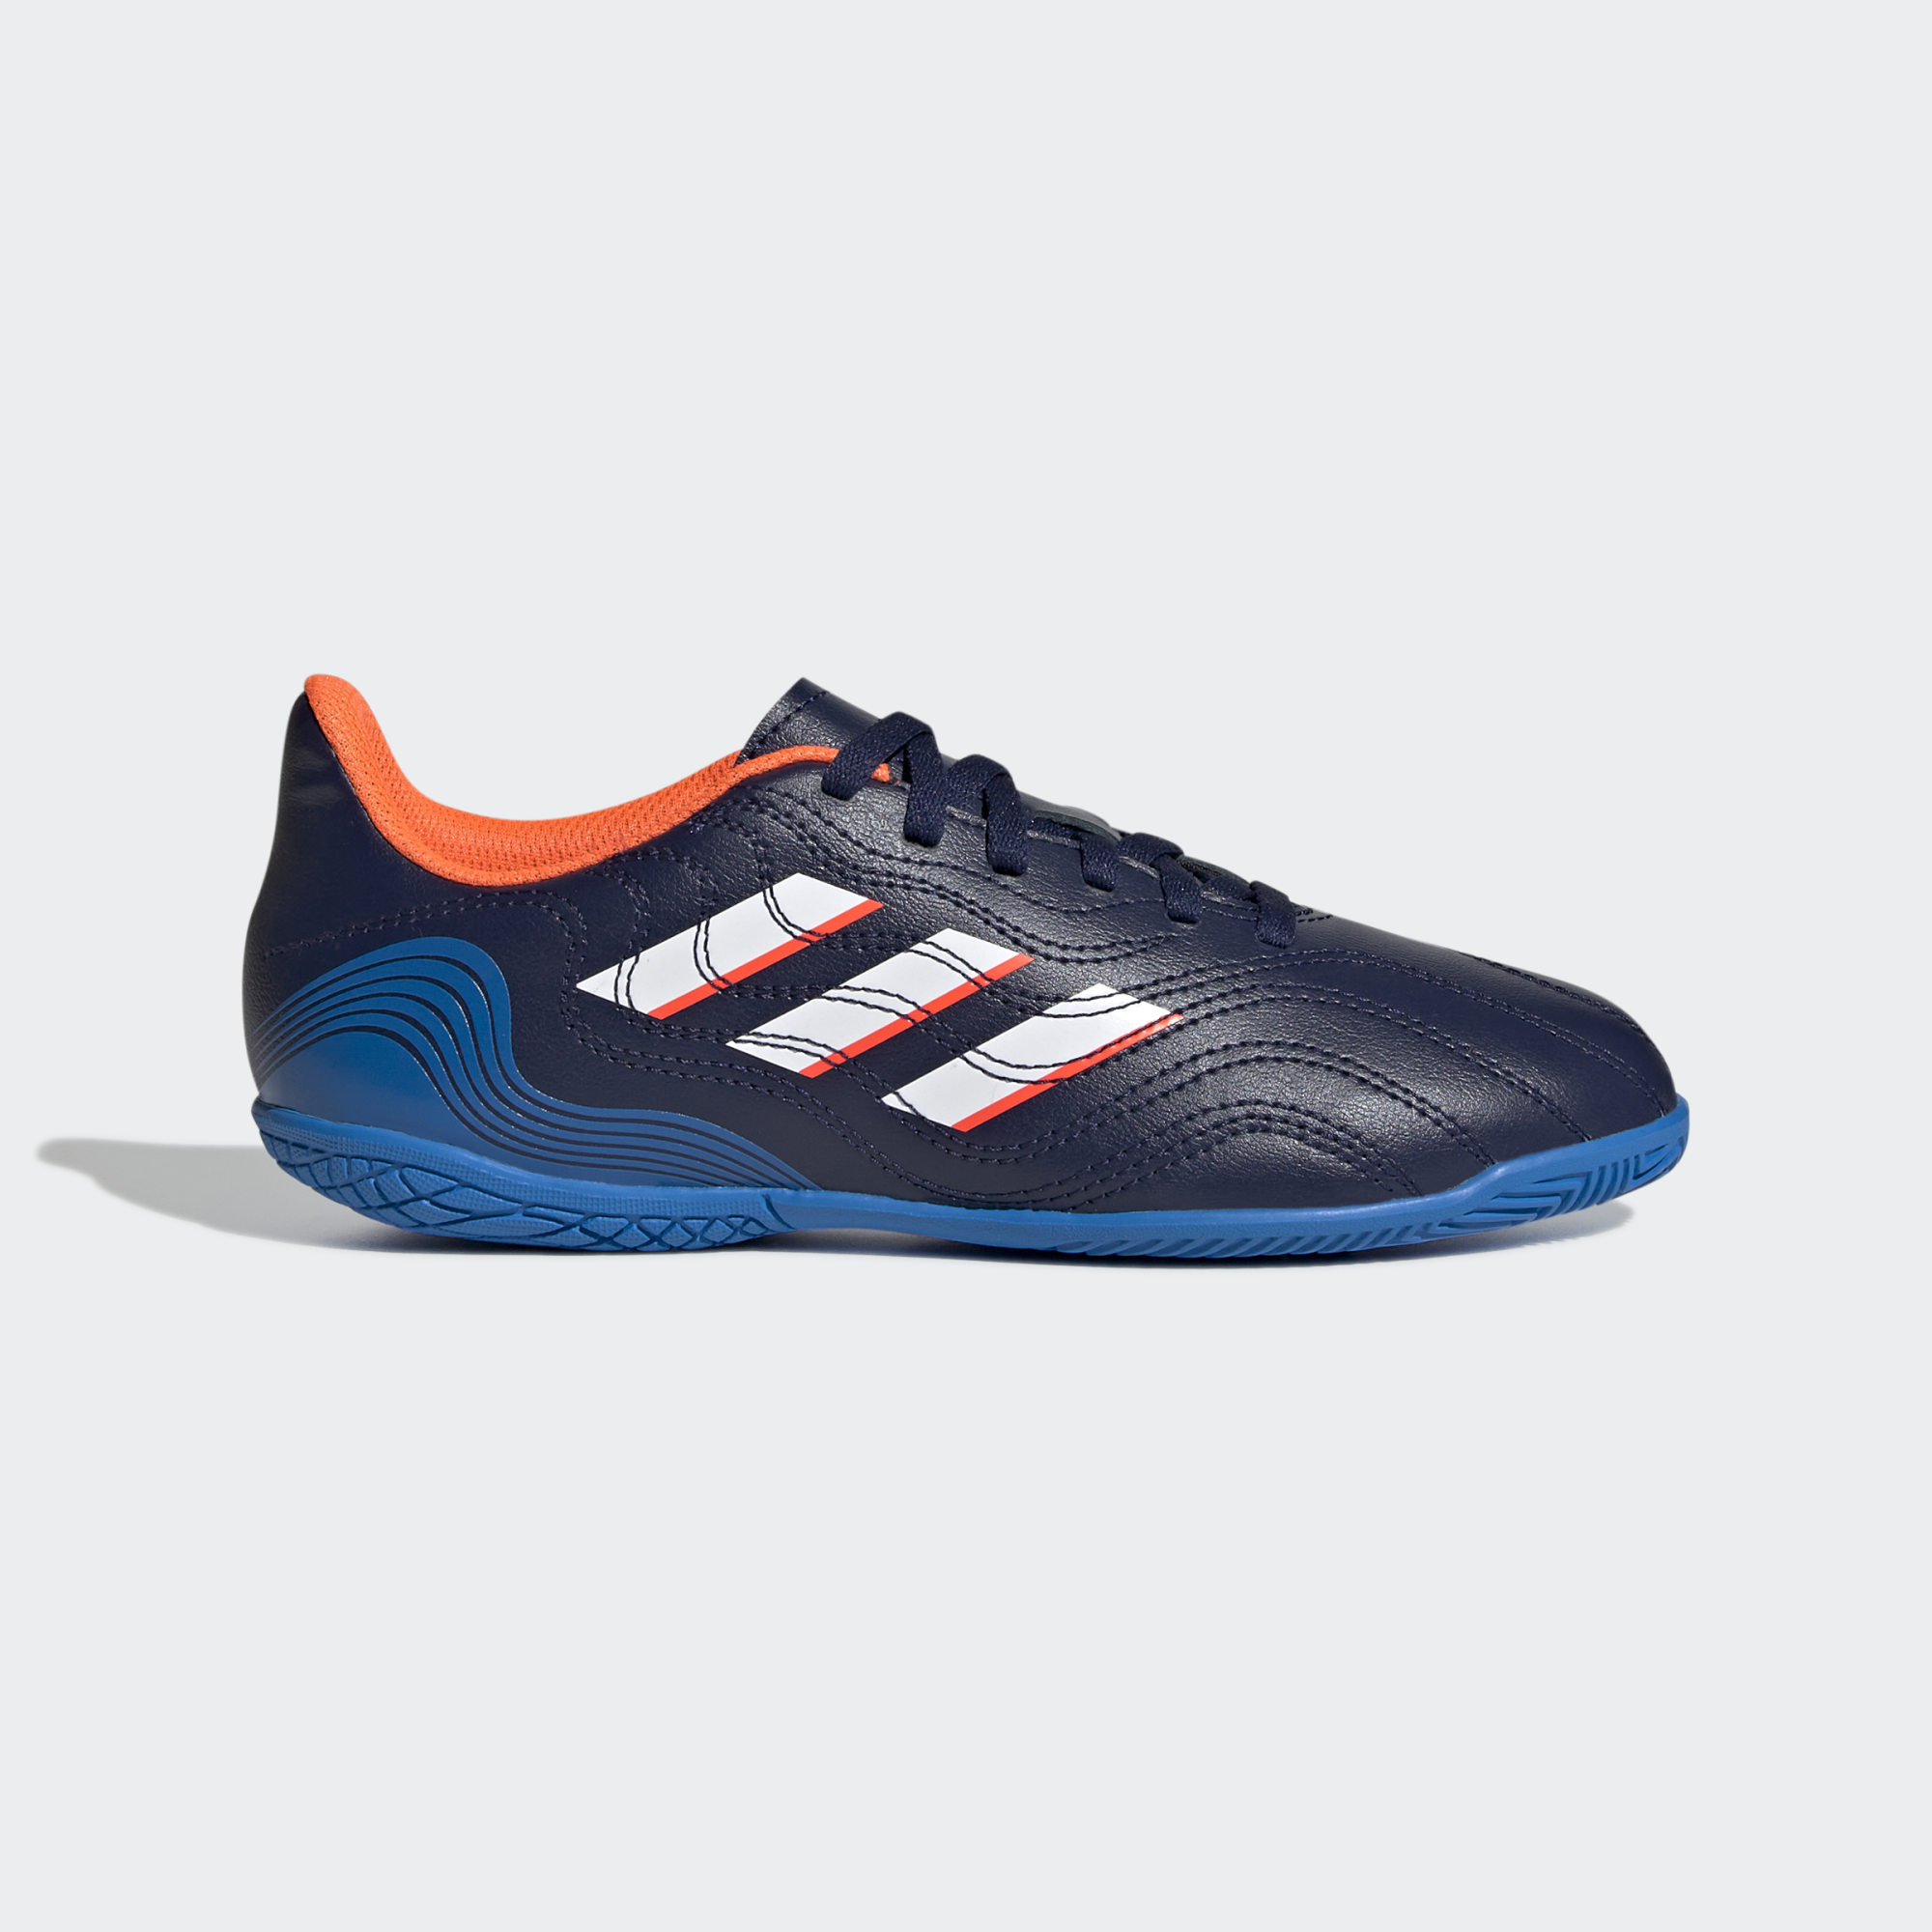 Stefans Soccer - Wisconsin - adidas Youth Sense.4 Indoor Shoes - Team Navy / Cloud White / Blue Rush